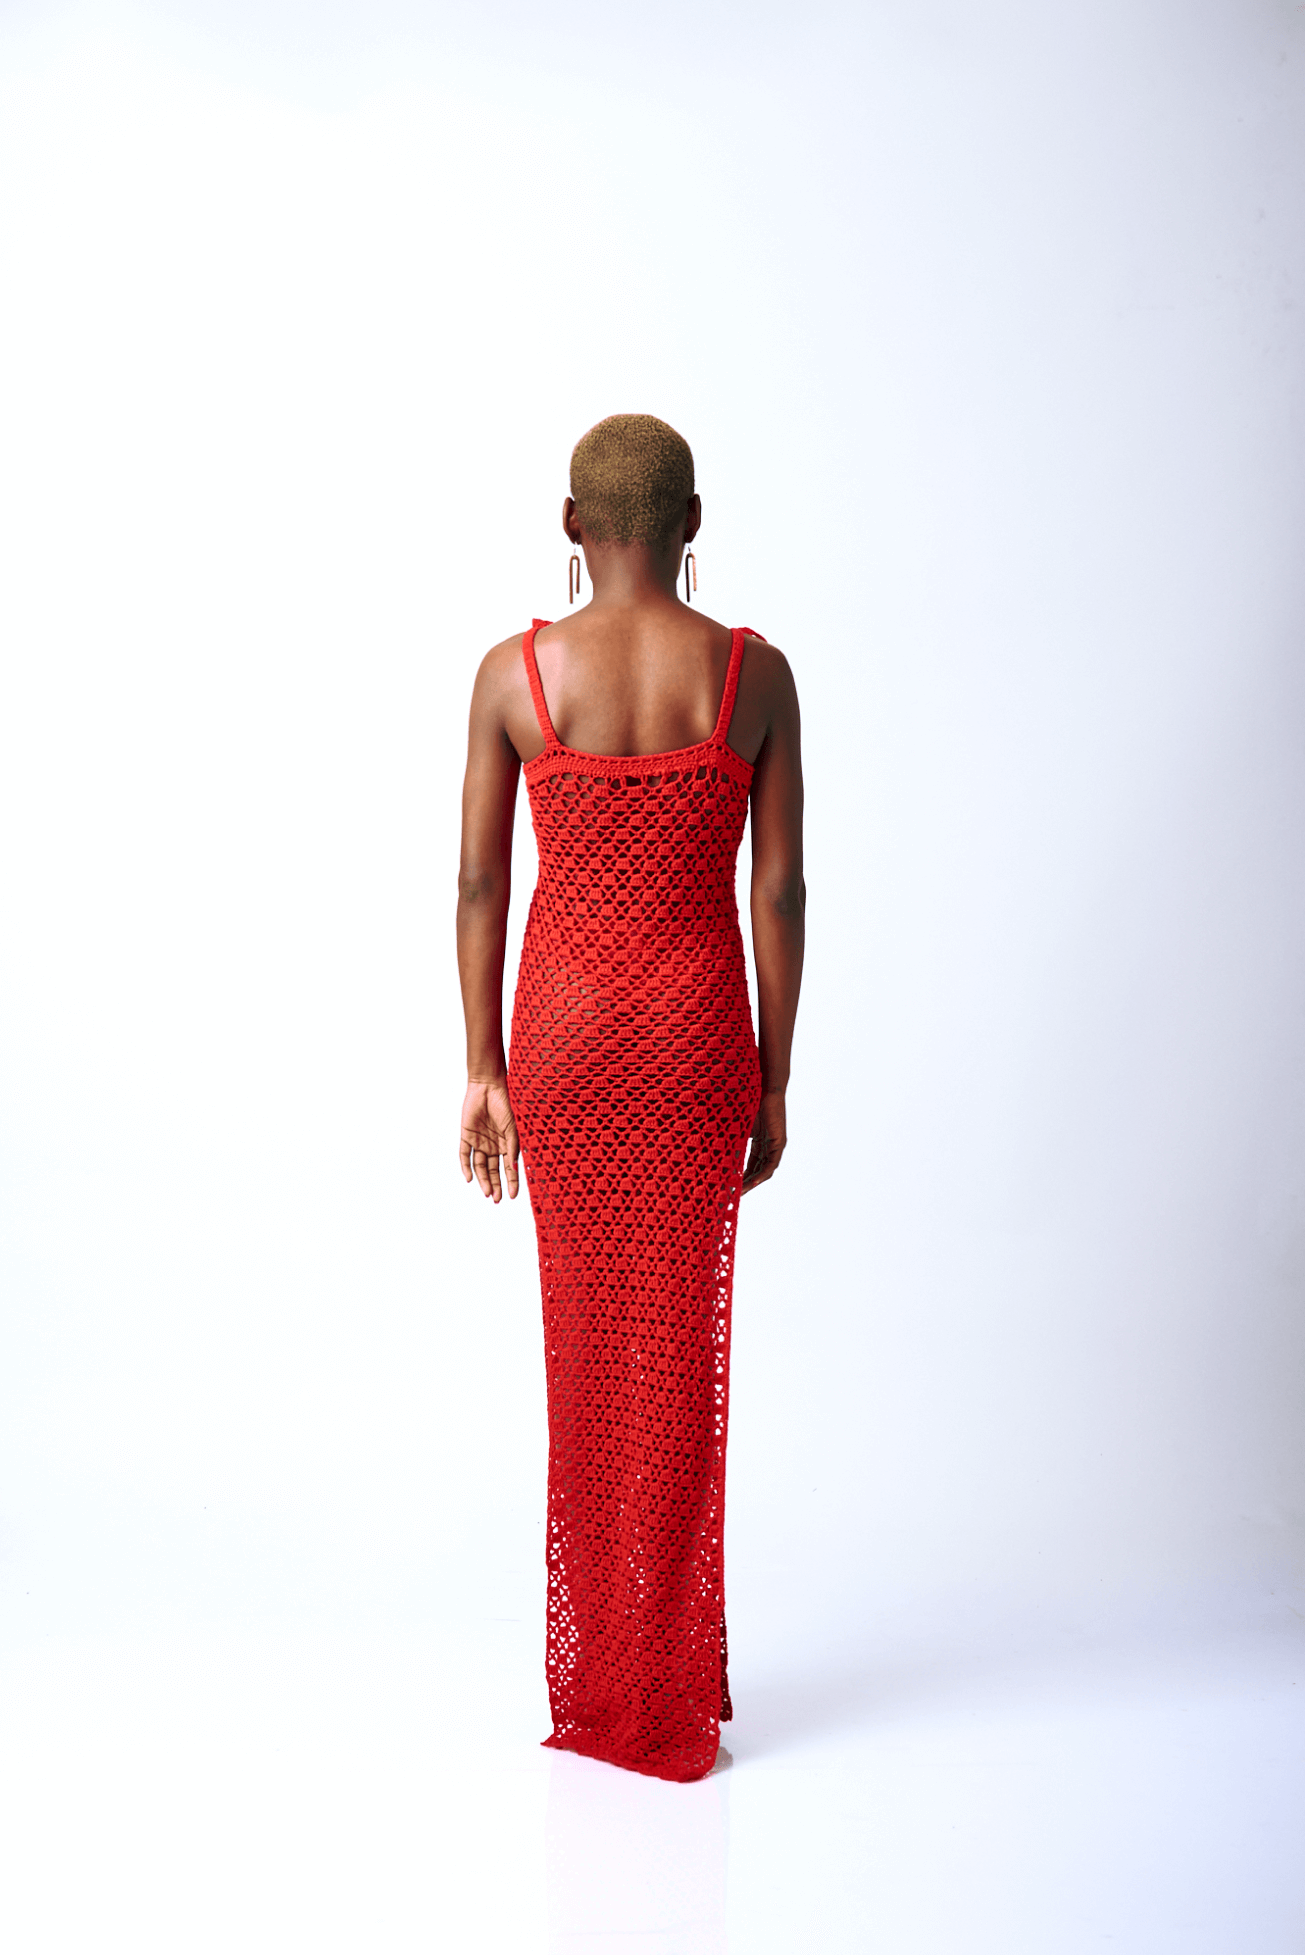 Shop Eko Crochet Maxi Dress by Olisa Kenya on Arrai. Discover stylish, affordable clothing, jewelry, handbags and unique handmade pieces from top Kenyan & African fashion brands prioritising sustainability and quality craftsmanship.